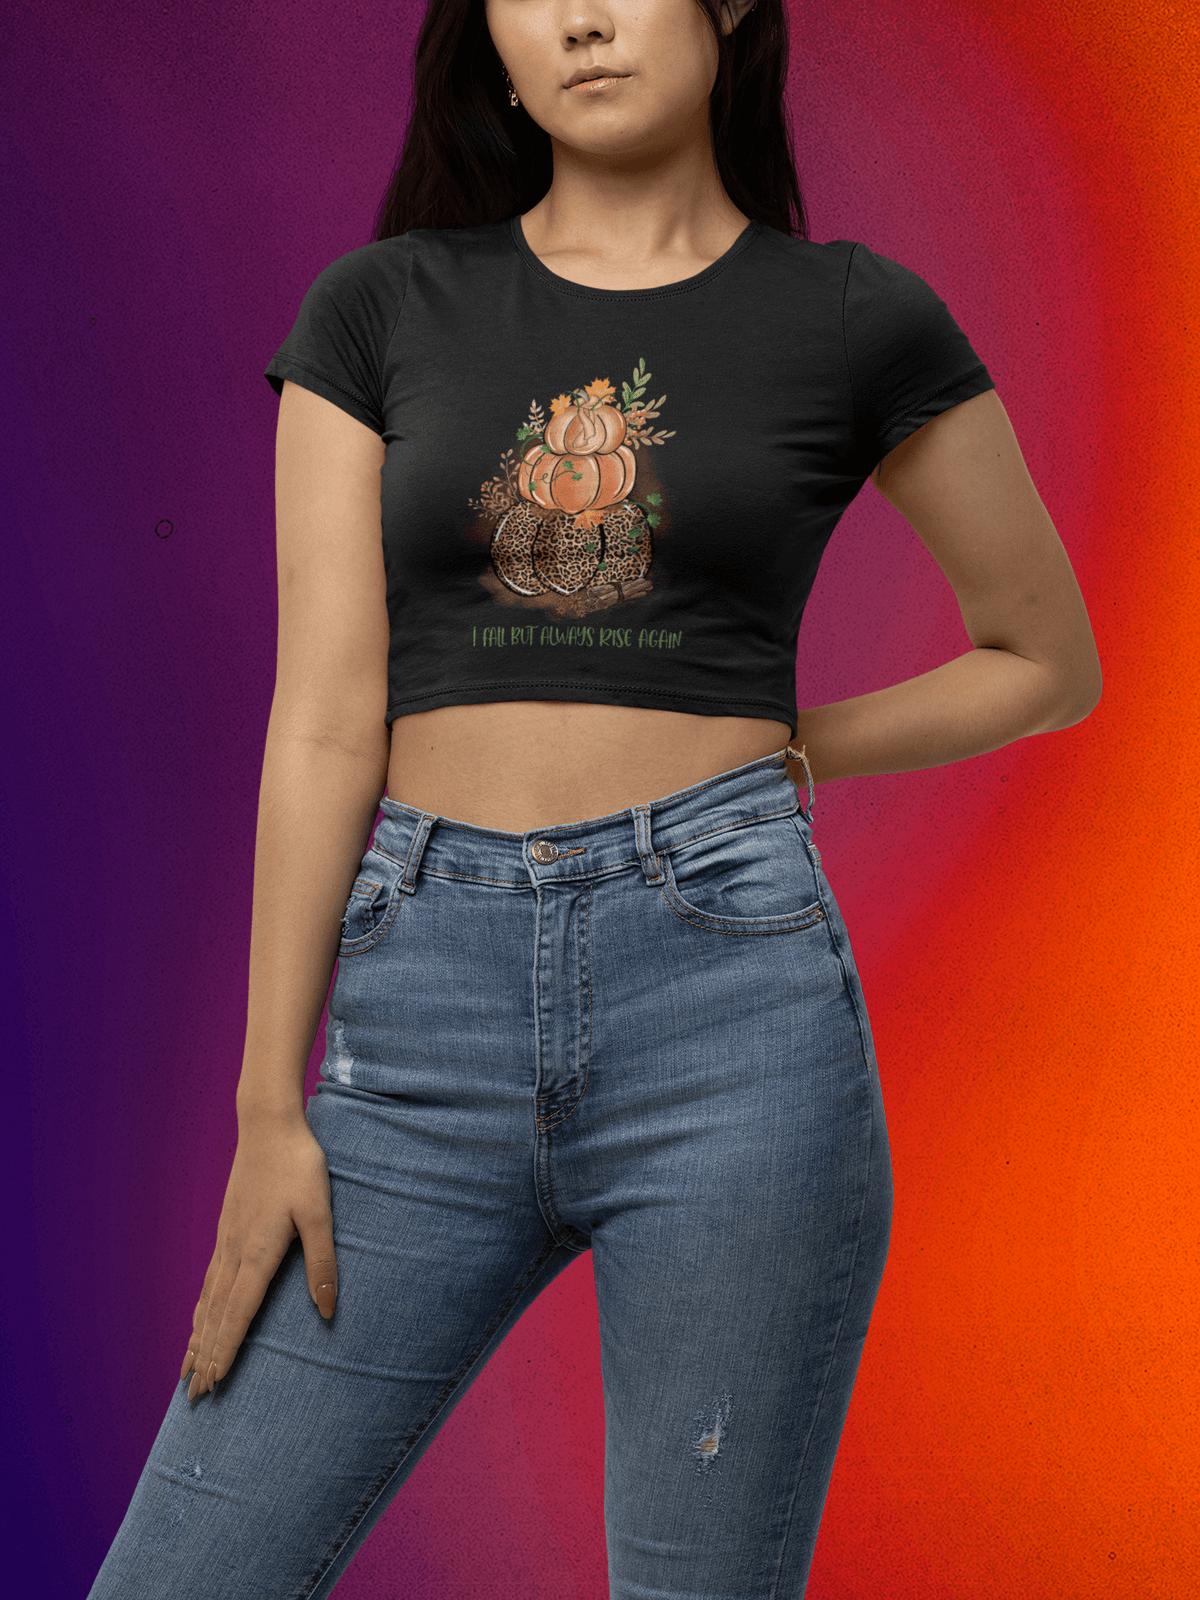 I FALL but Always RISE again Cropped T-Shirt-Cropped Tees-StylinArts